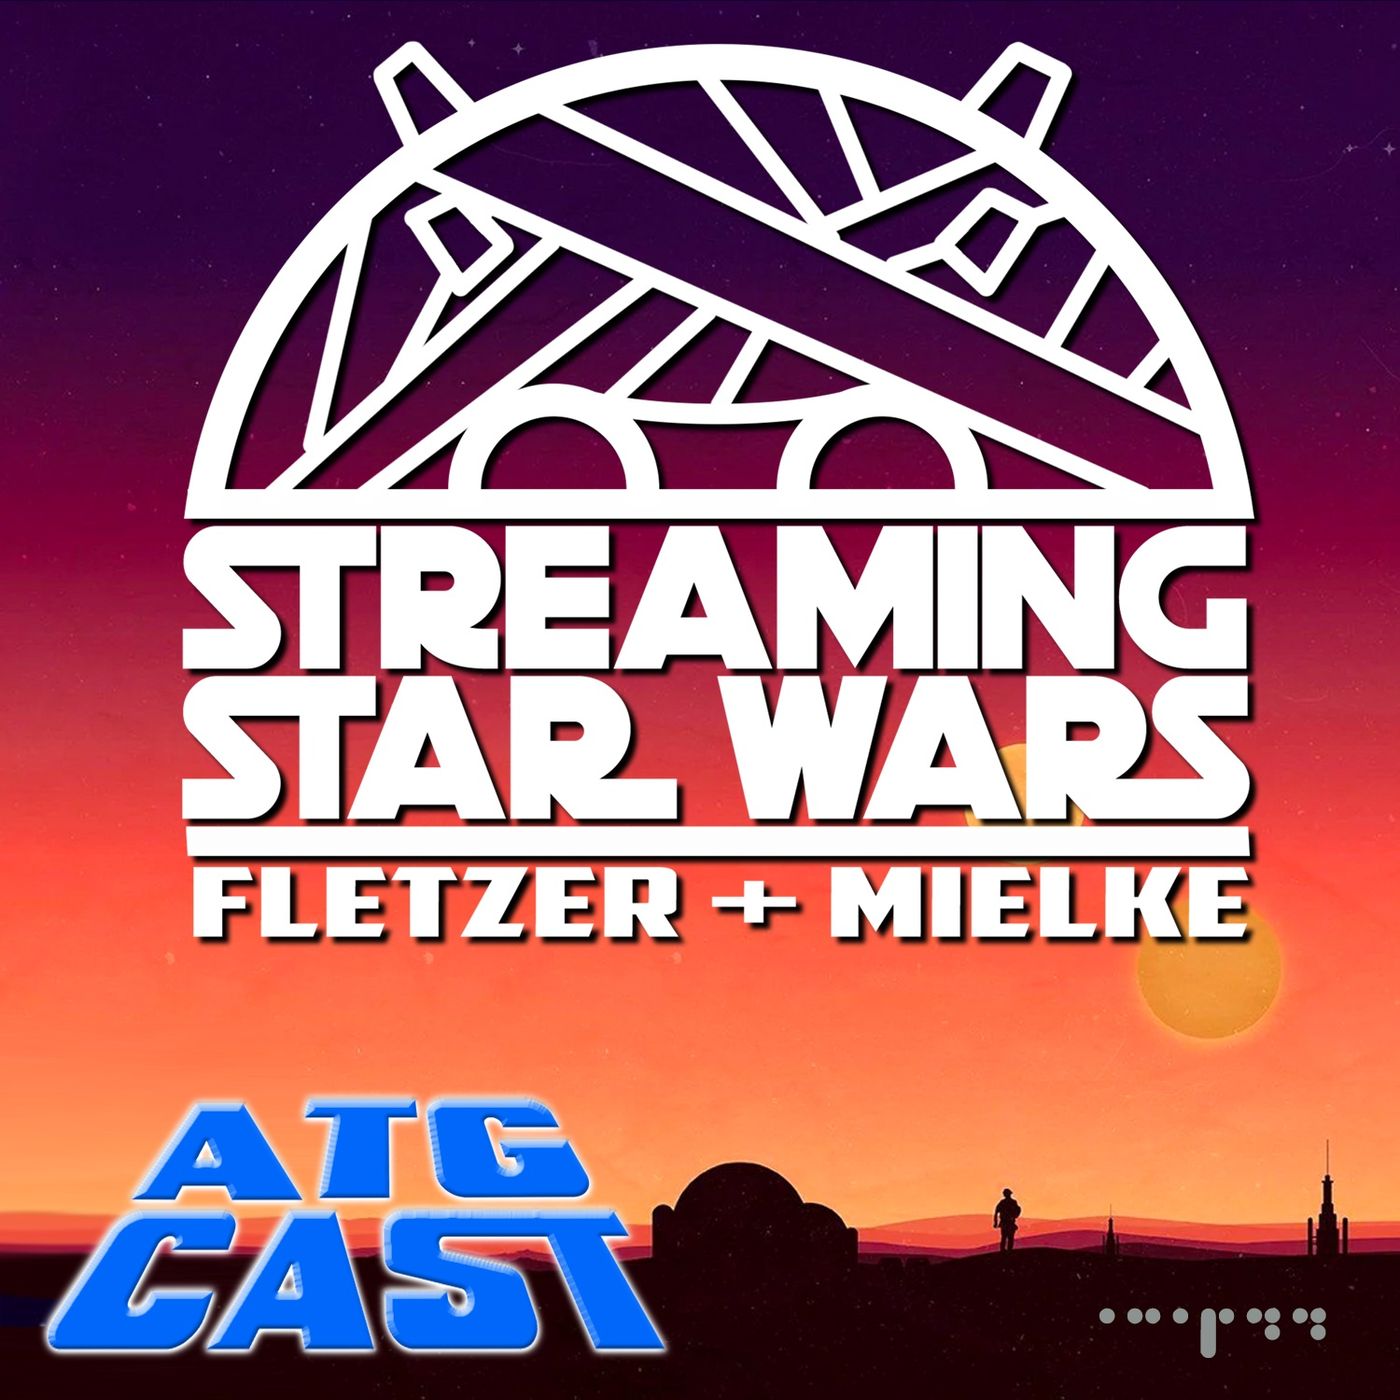 Streaming Star Wars - Boba's Back and So Are We!